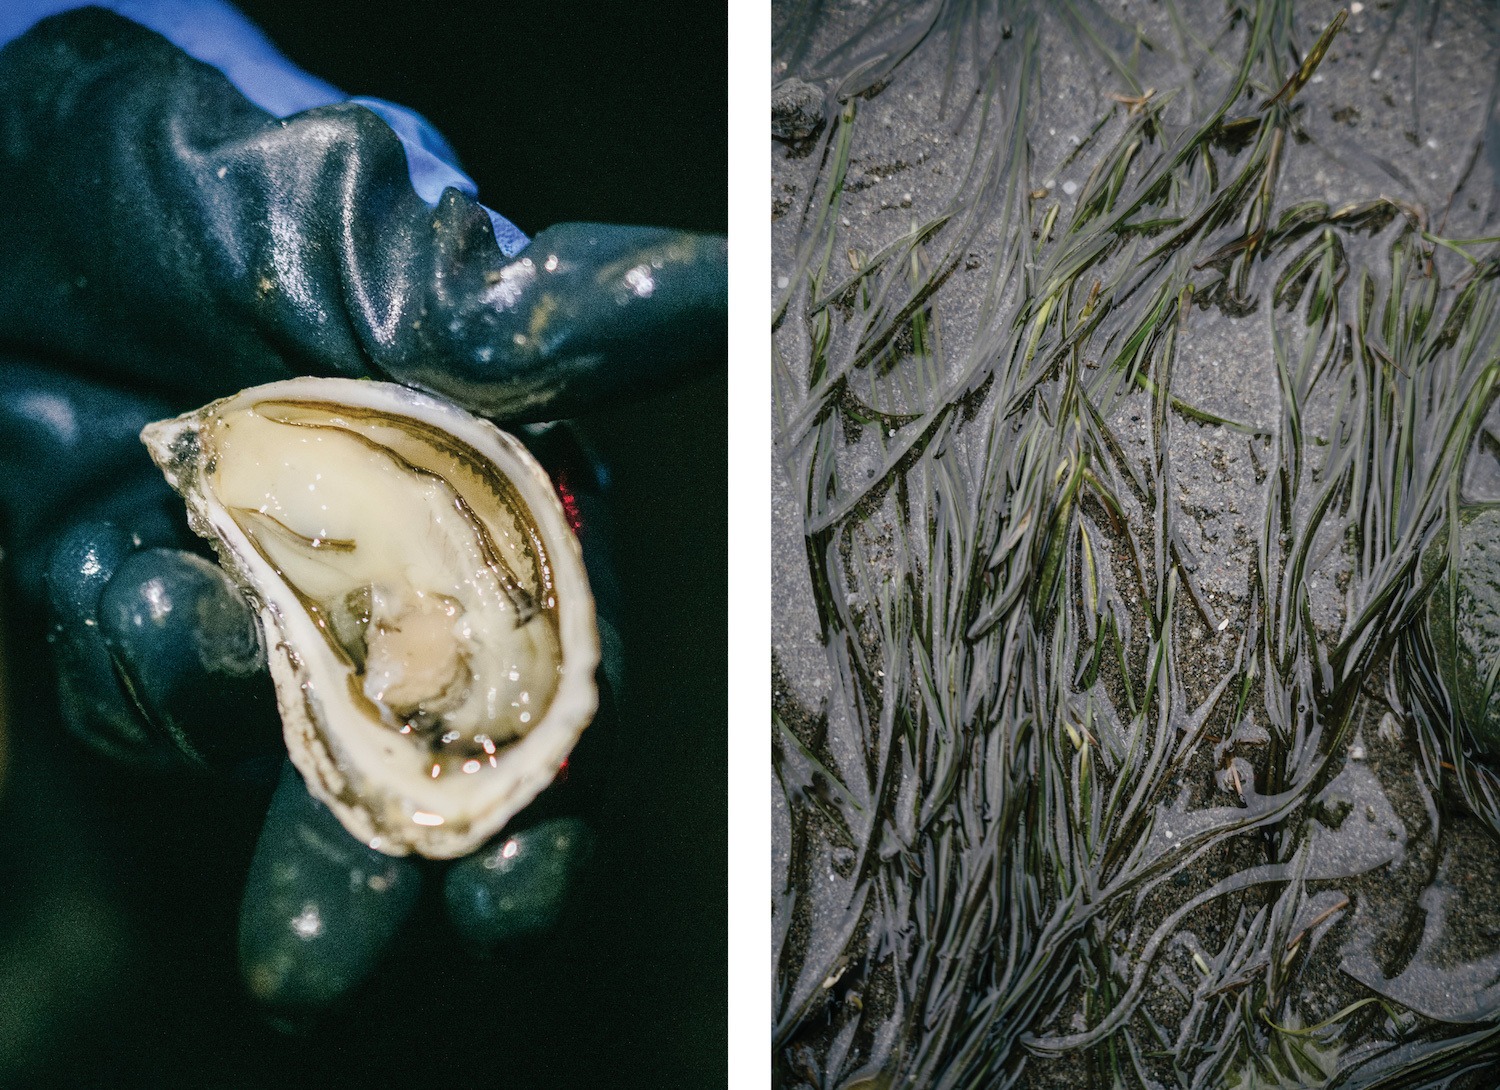 Stuart Thomas displays a Pacific oyster. Right, eelgrass at low tide. October 2021